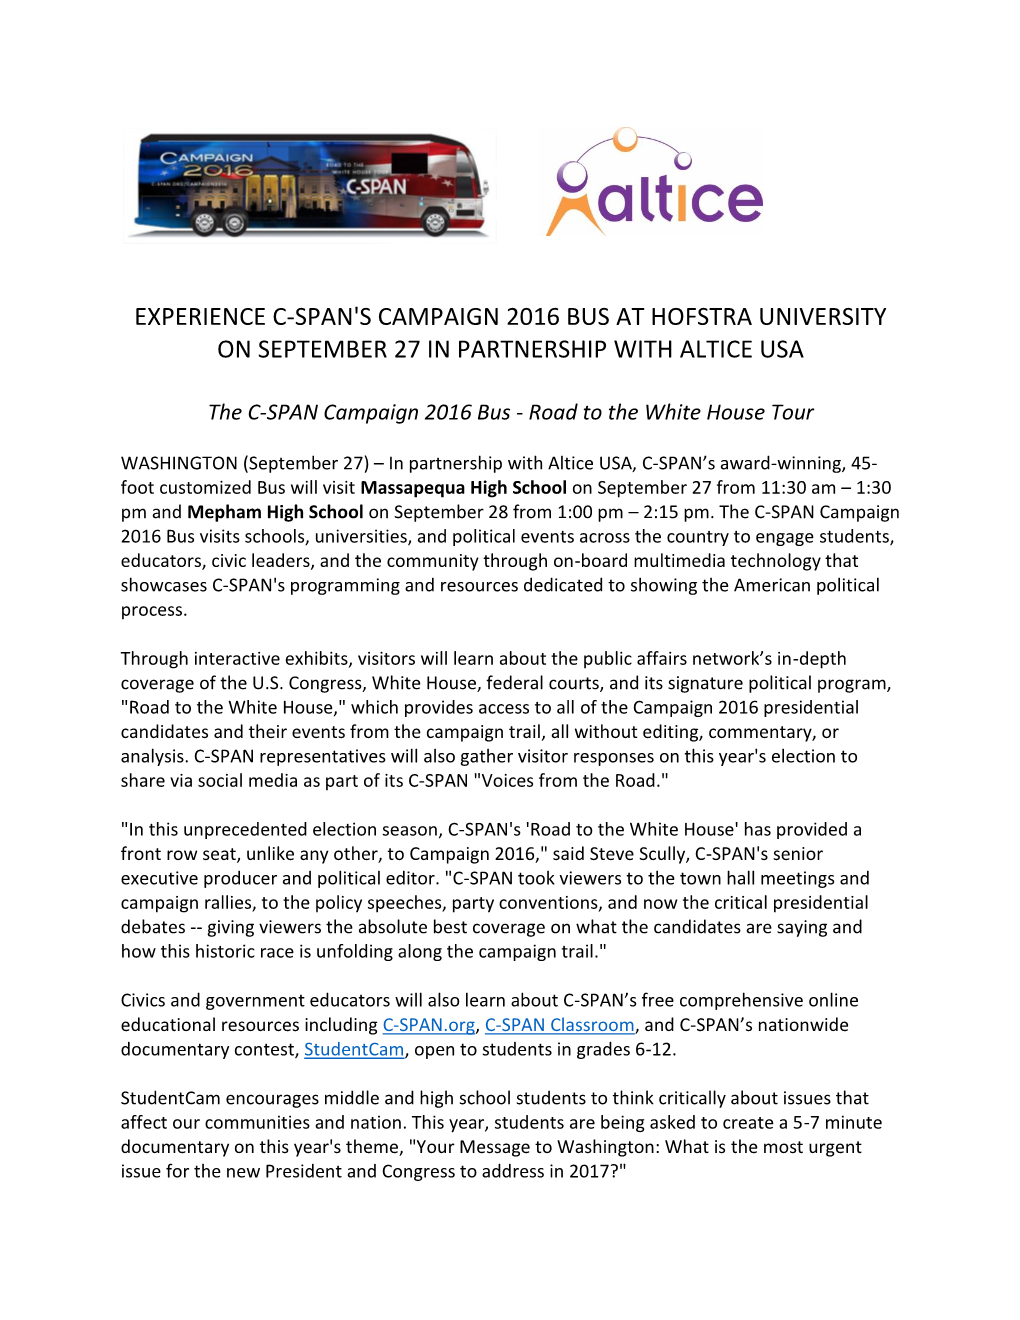 Experience C-Span's Campaign 2016 Bus at Hofstra University on September 27 in Partnership with Altice Usa